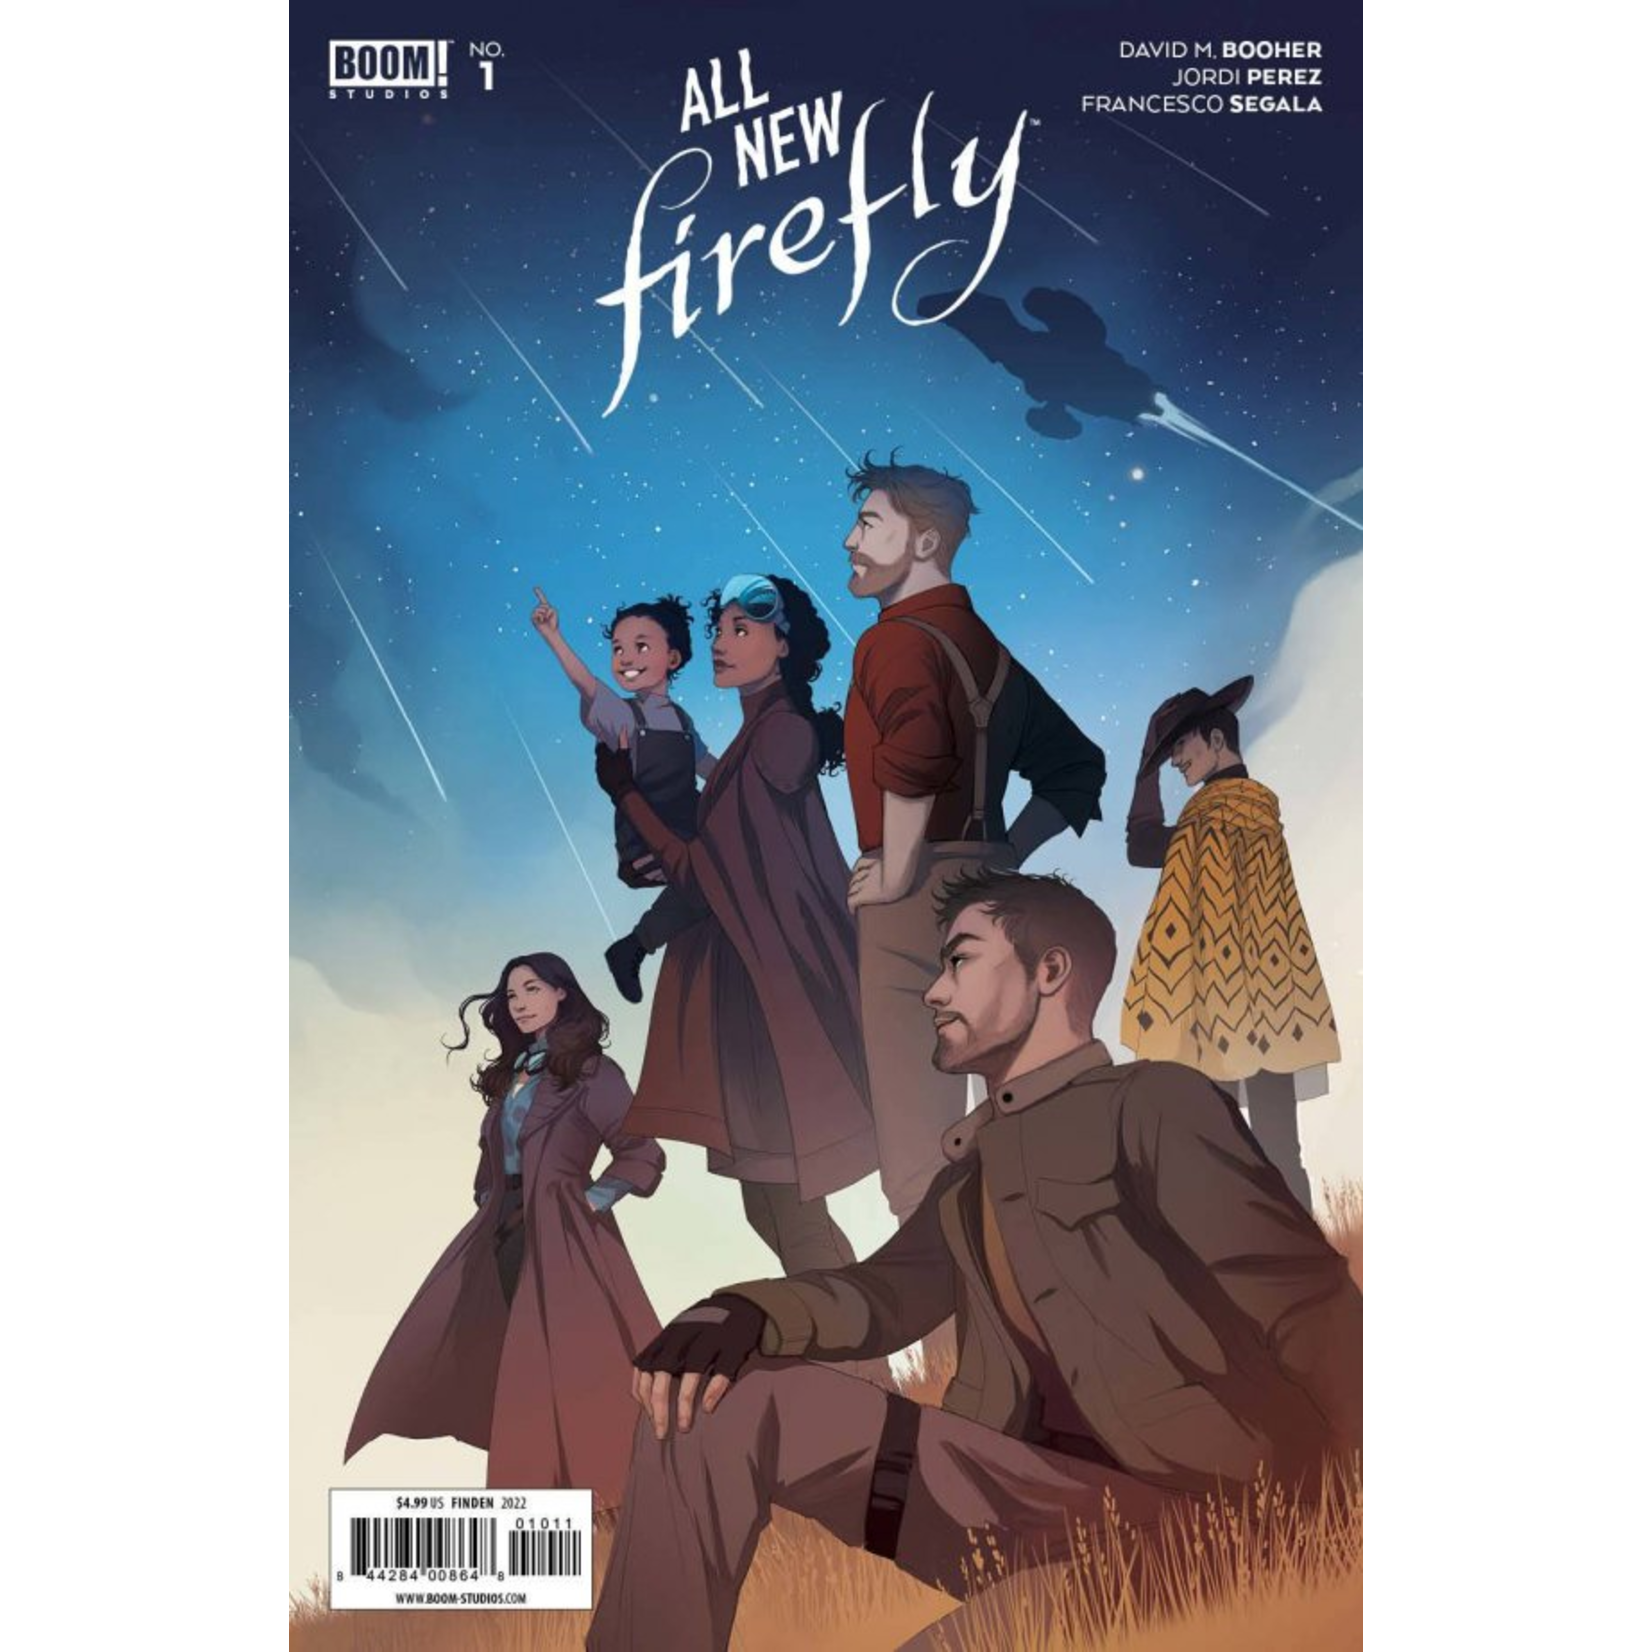 Boom ! All New Firefly #1